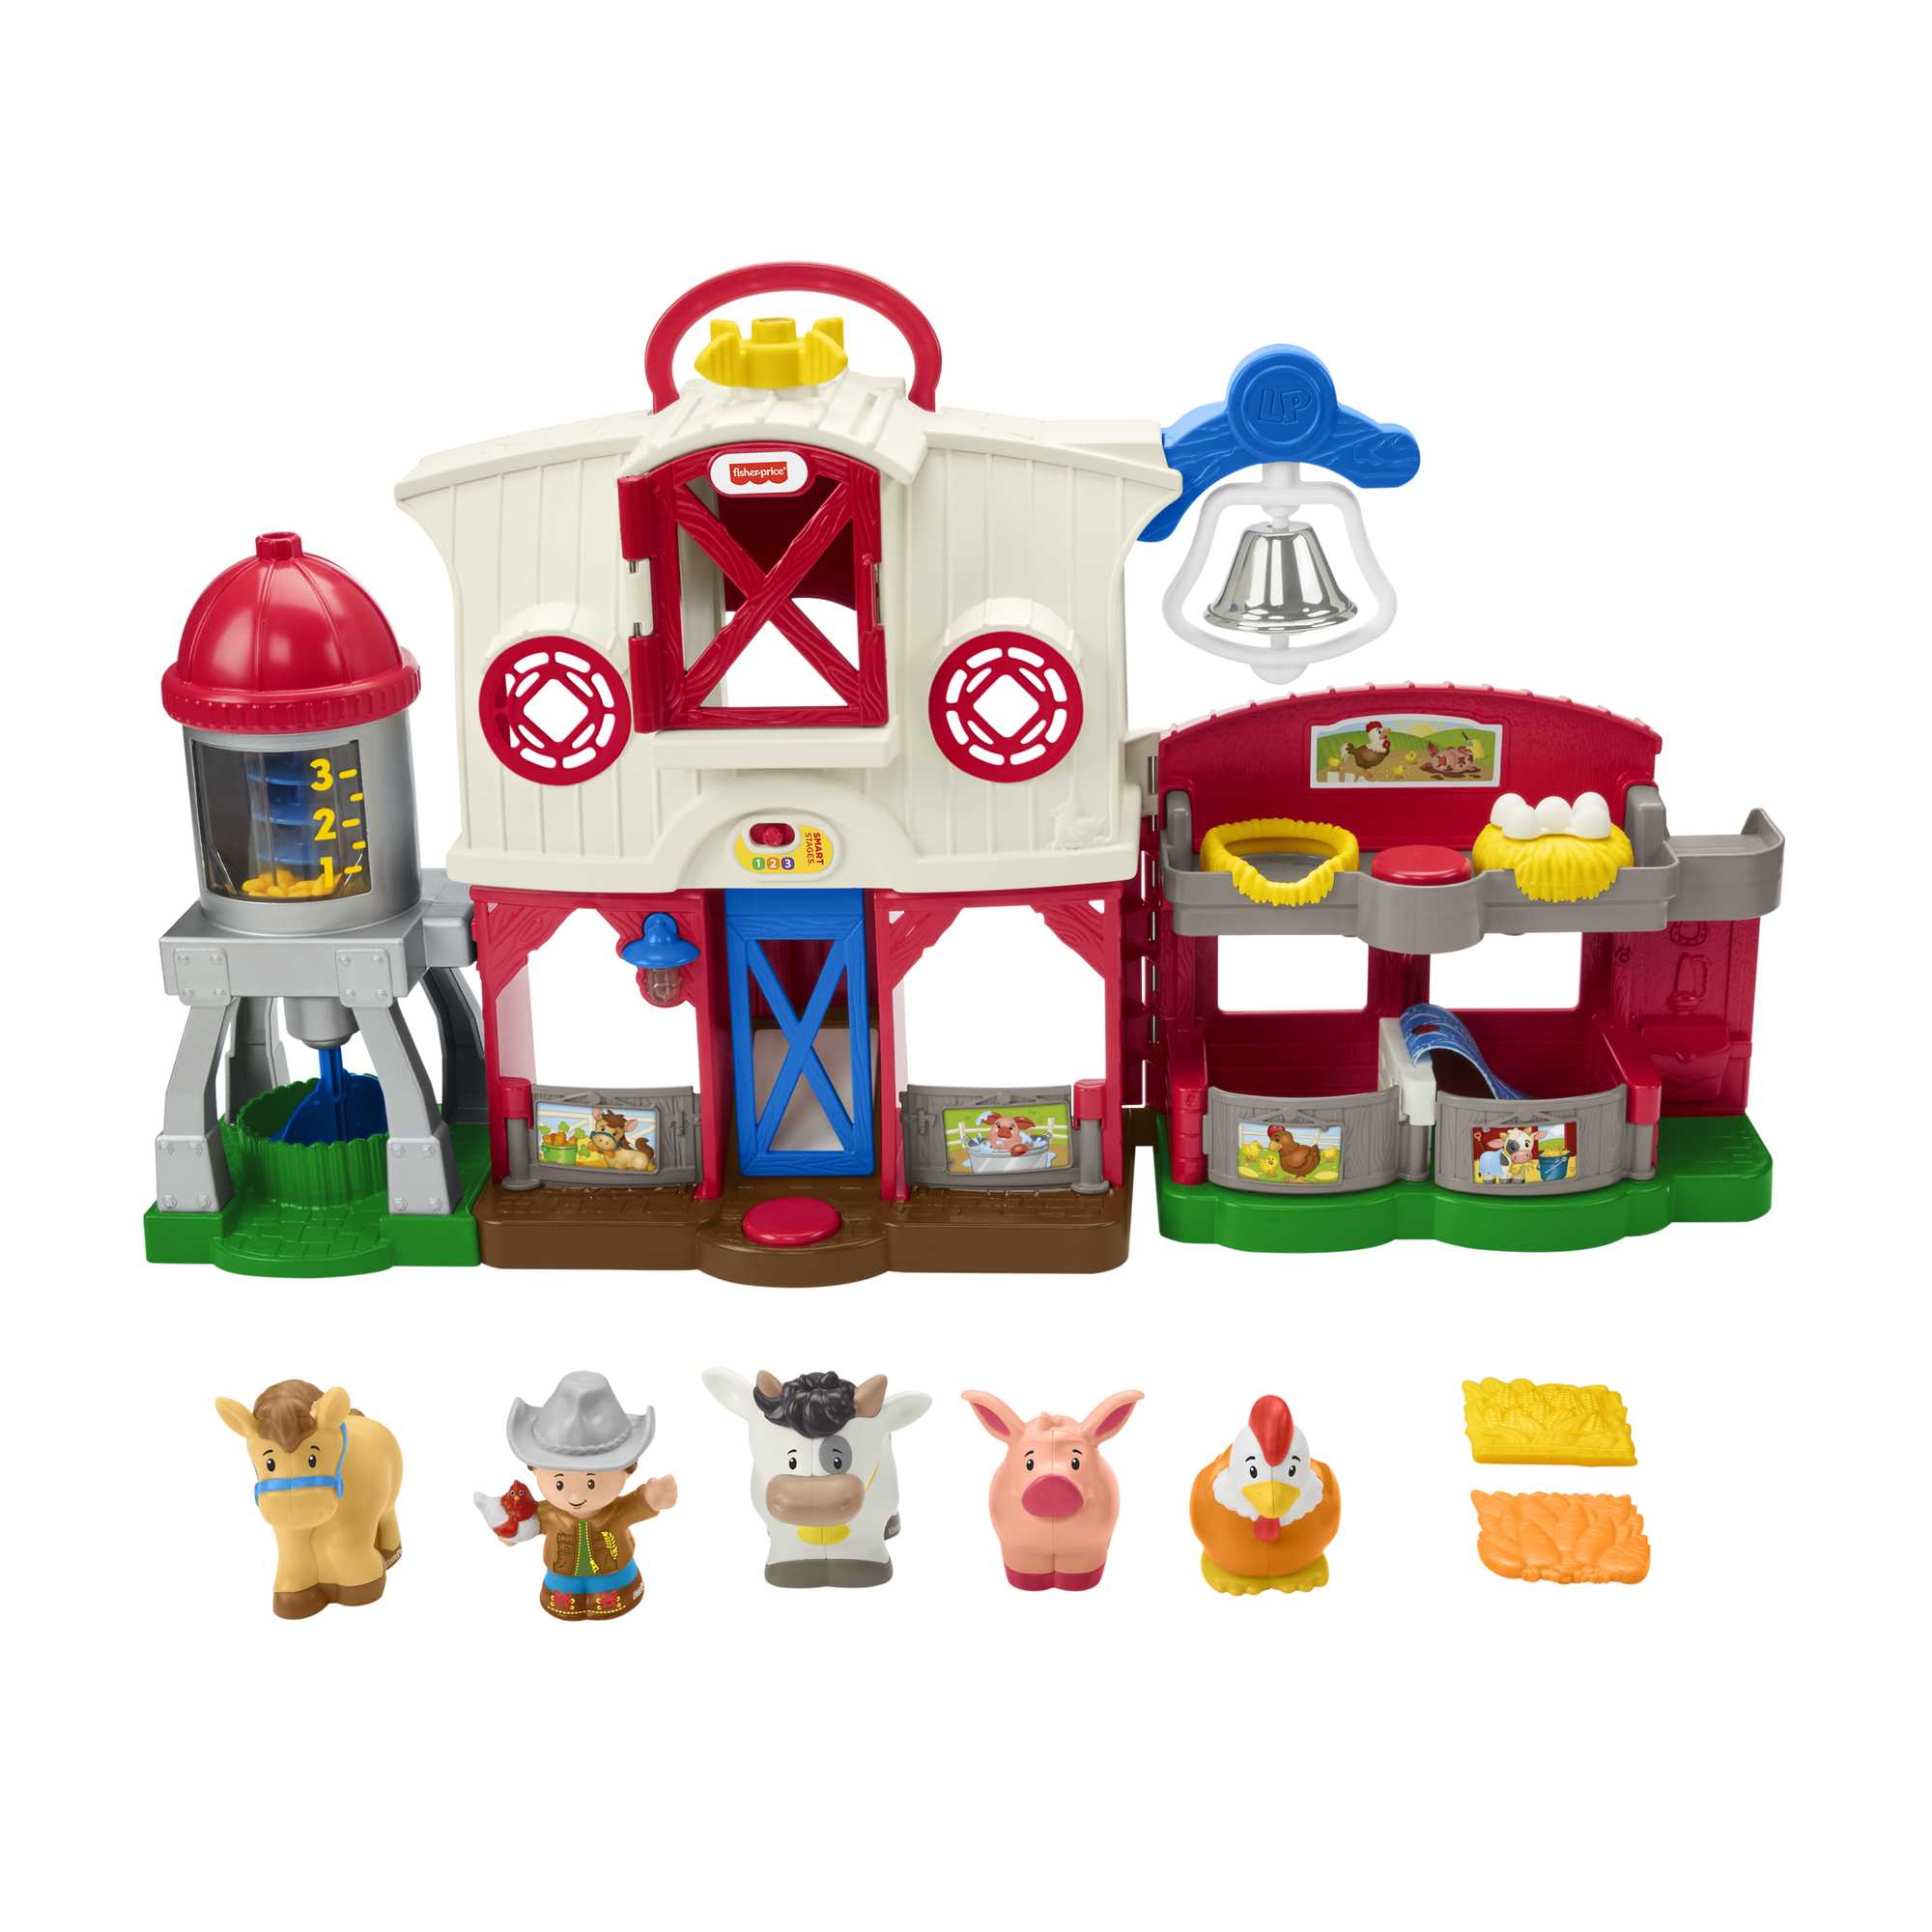 Fisher-Price® Little People Figures - Assorted, 2 pc - City Market